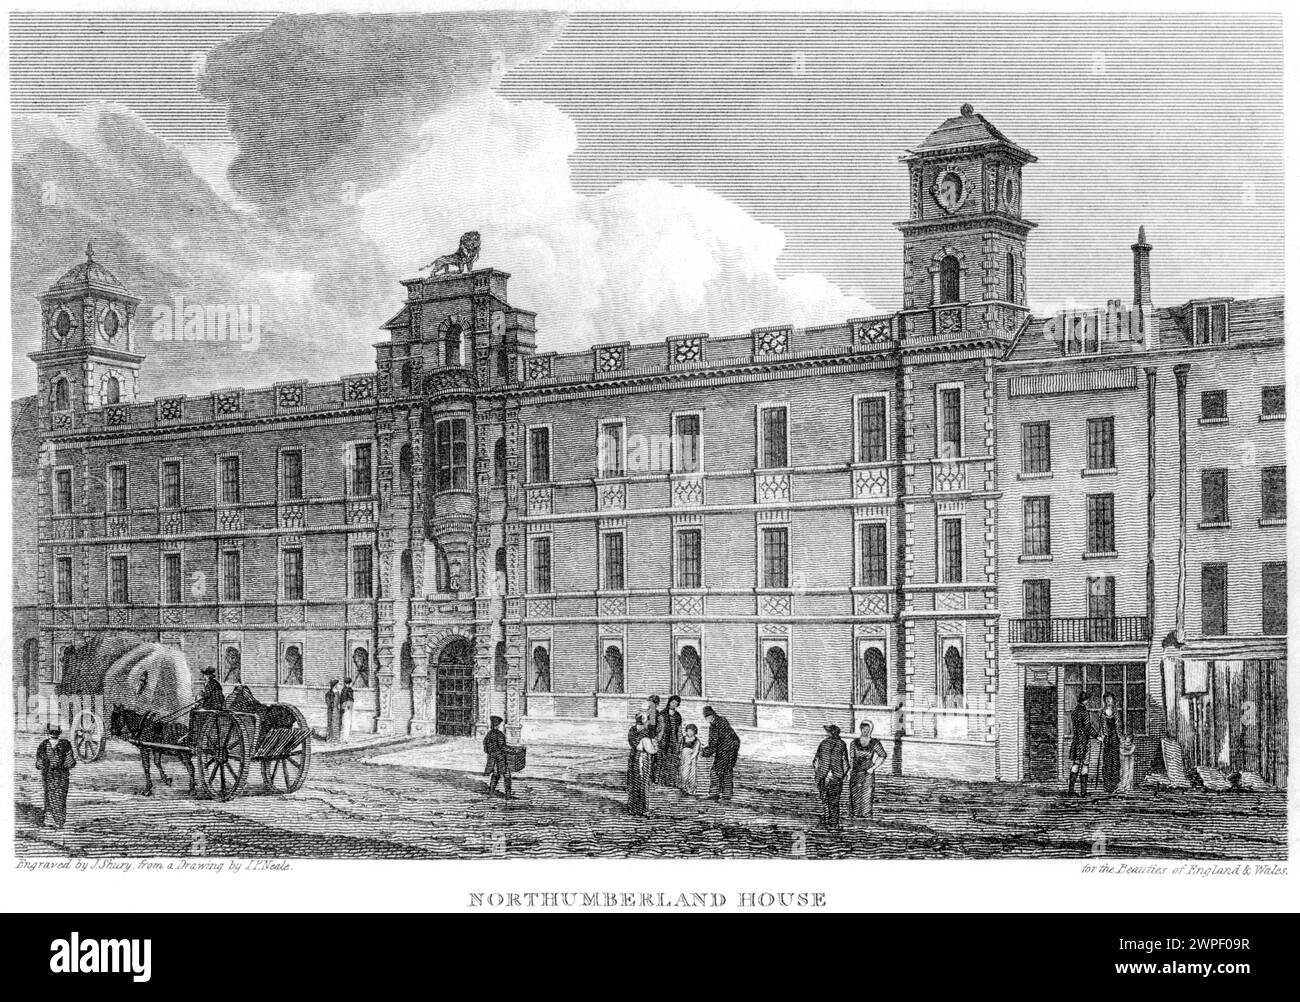 An engraving entitled Northumberland House, London UK scanned at high resolution from a book published around 1815. Stock Photo